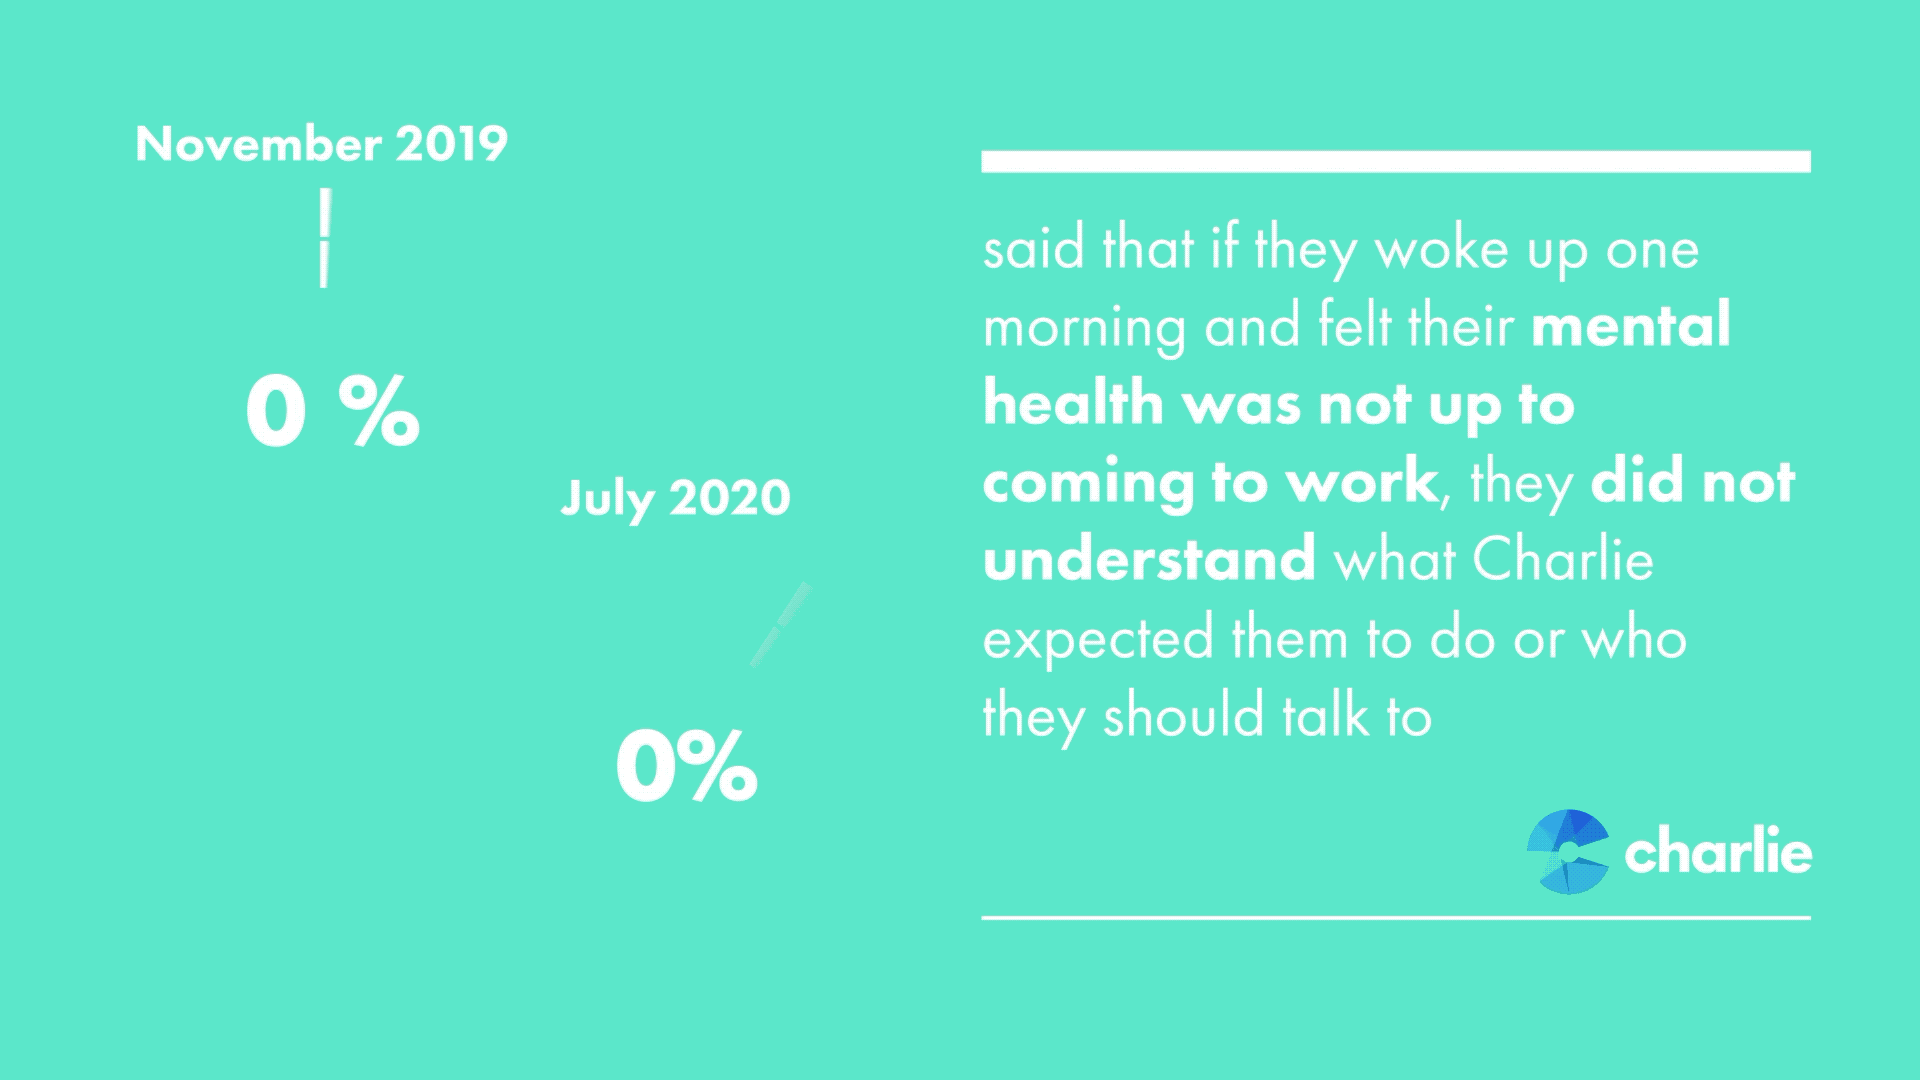 Only 9% of people are still not sure about what to do when they wake up feeling poorly with their mental health compared to 44% before the policy